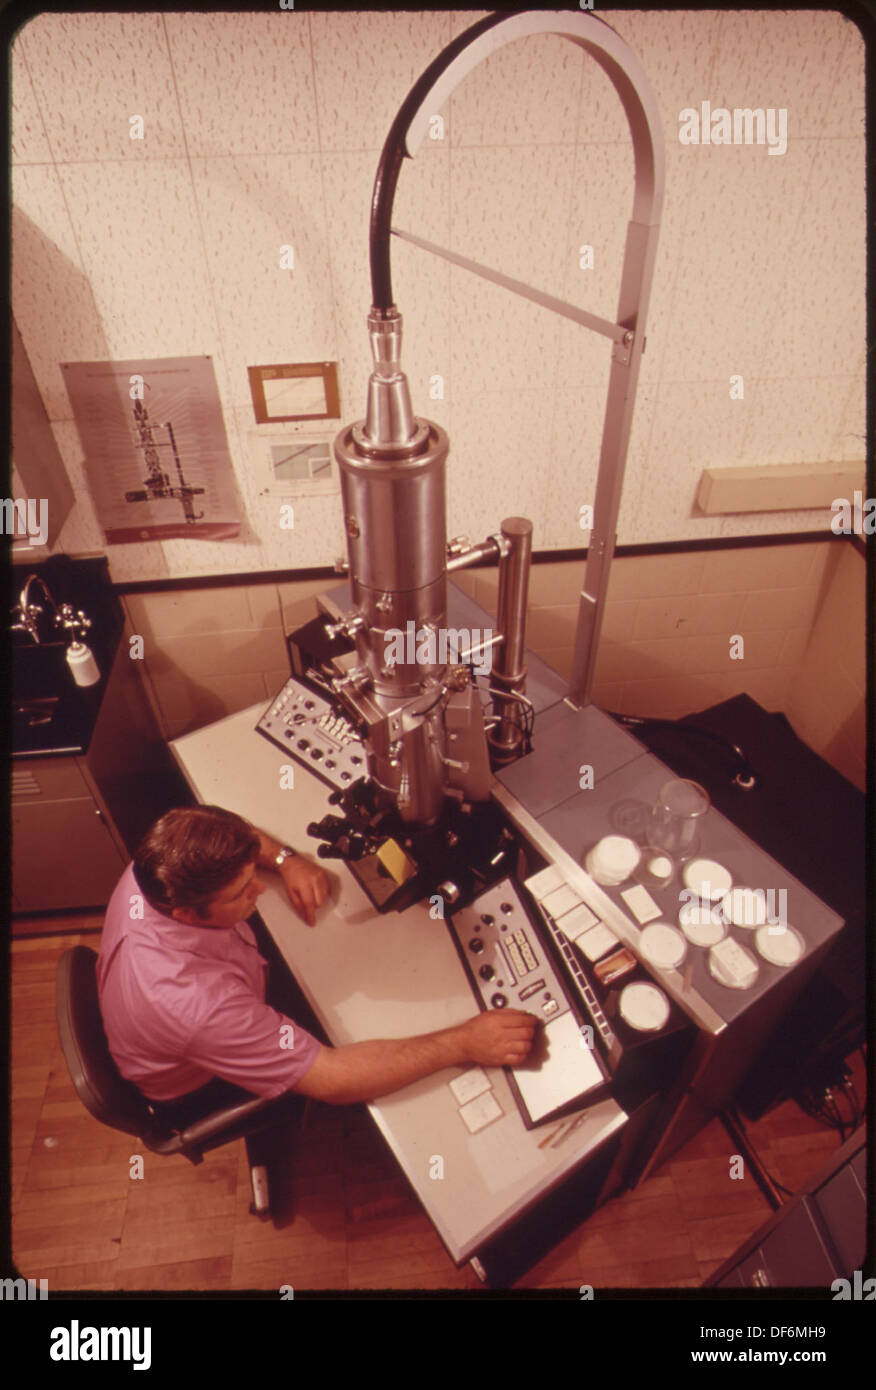 NATIONAL WATER QUALITY LABORATORY, OPERATING THE ELECTRON MICROSCOPE 551594 Stock Photo